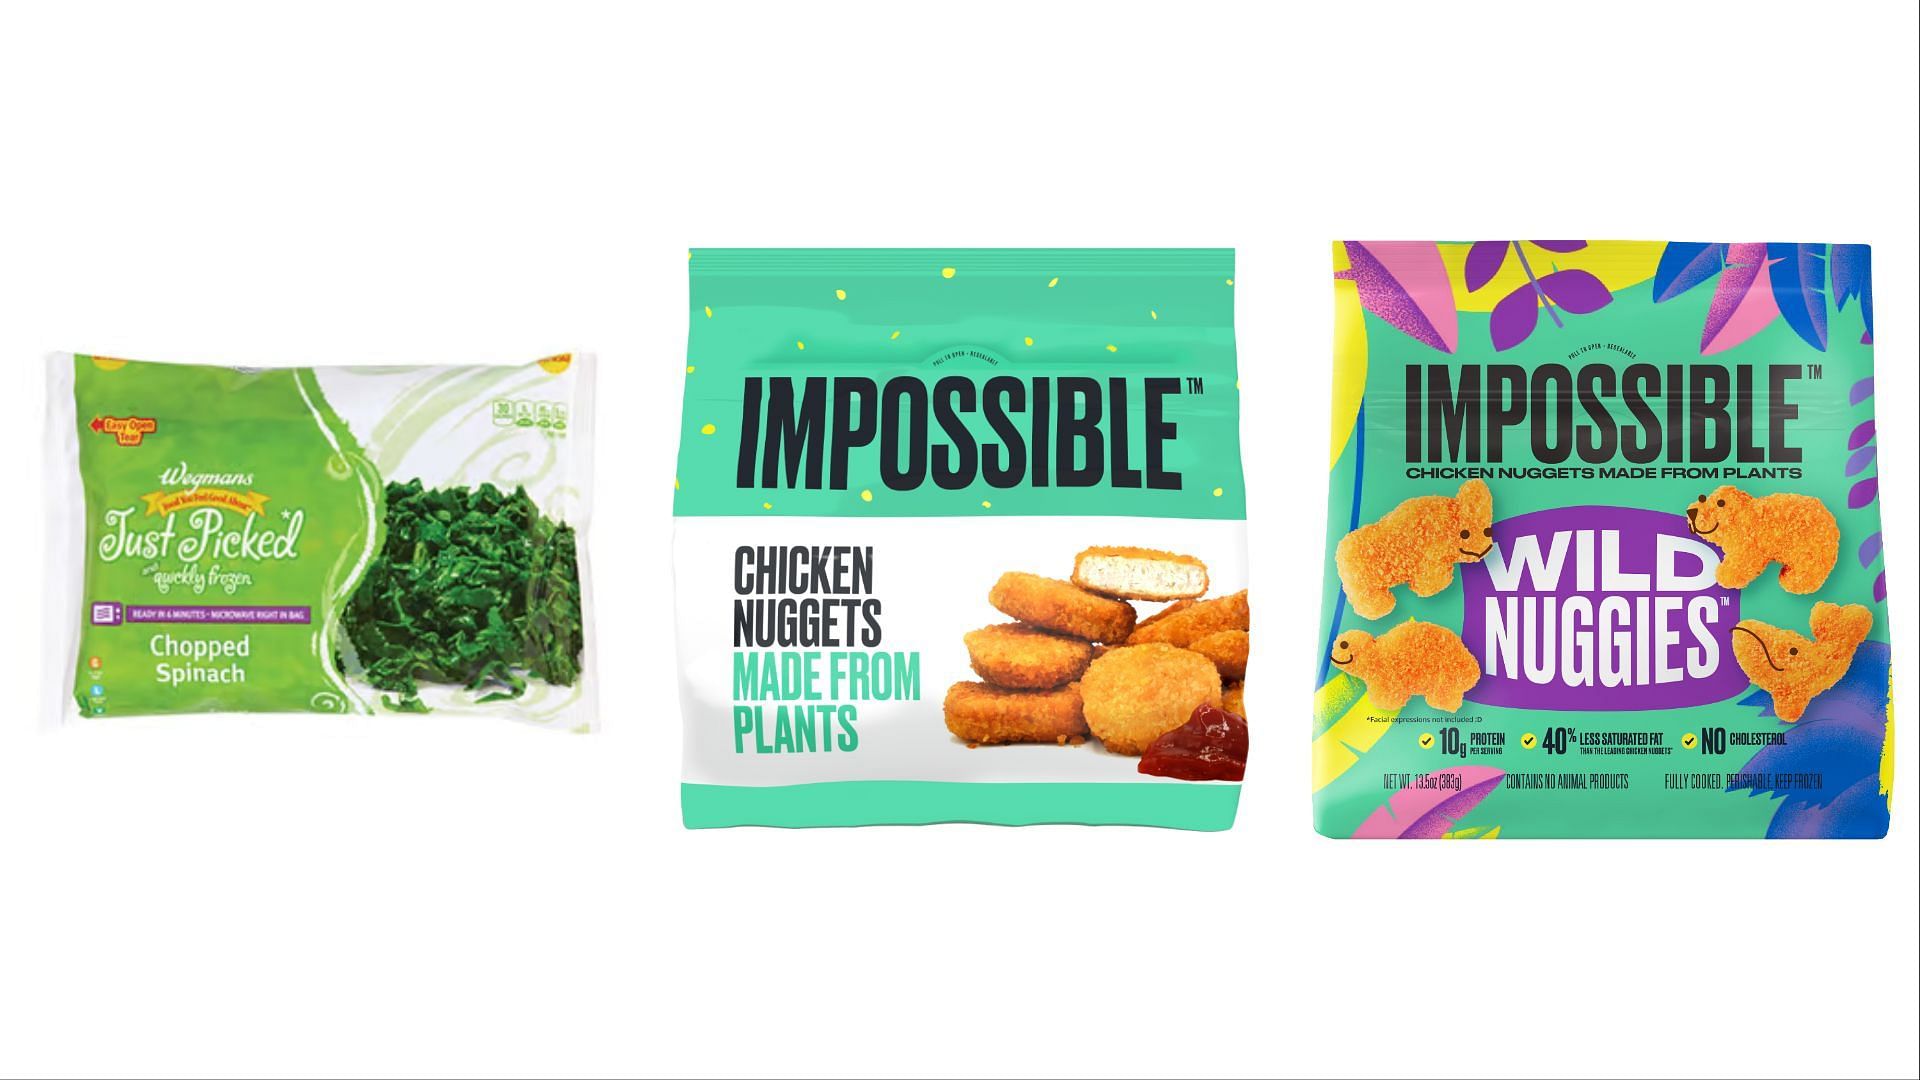 Wegmans frozen spinach and Impossible chicken nuggets recall reason